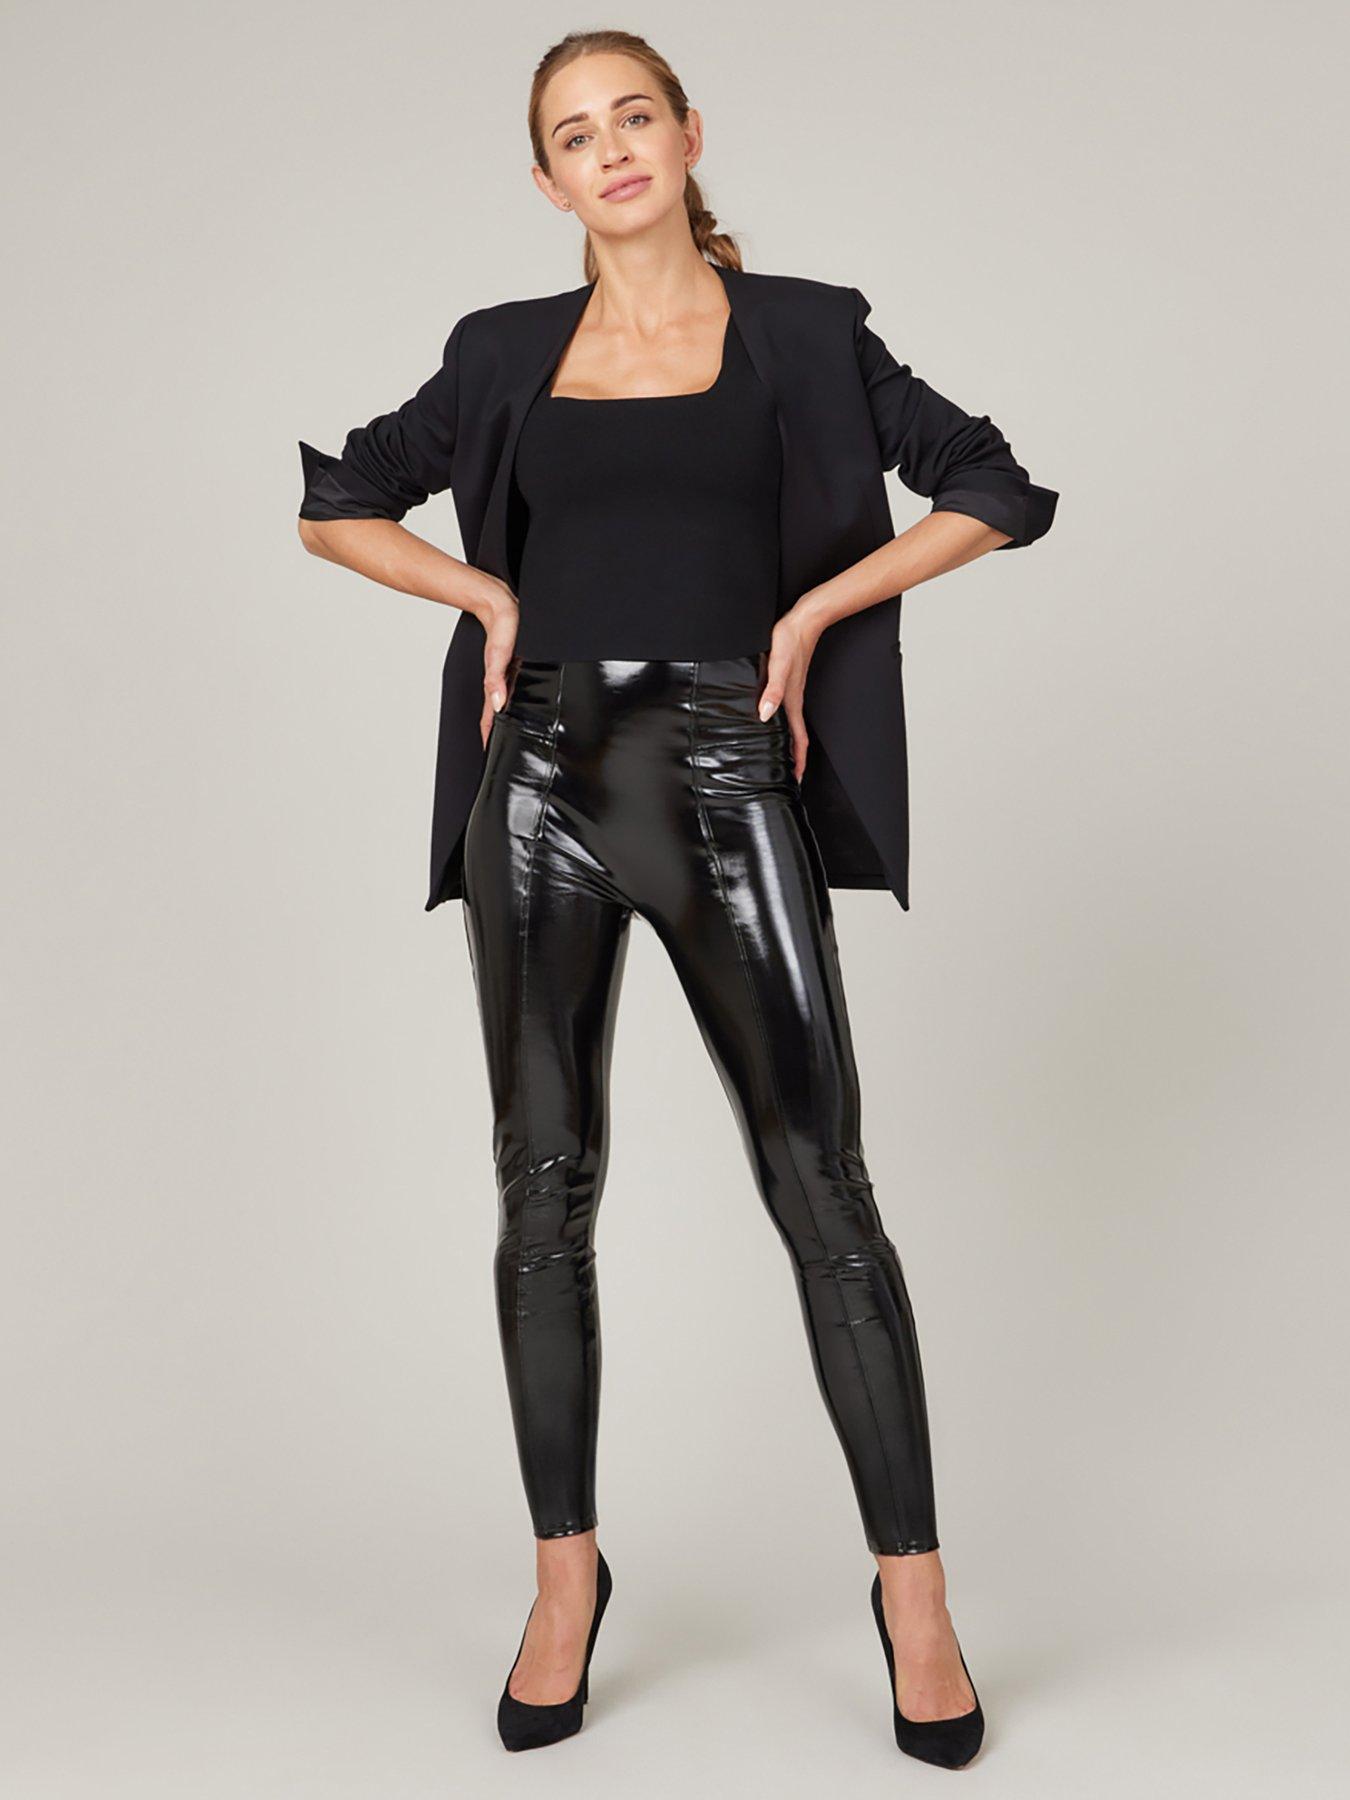 SPANX, Pants & Jumpsuits, Spanx Faux Leather Moto Leggings Very Black  Style No 236r Size Medium